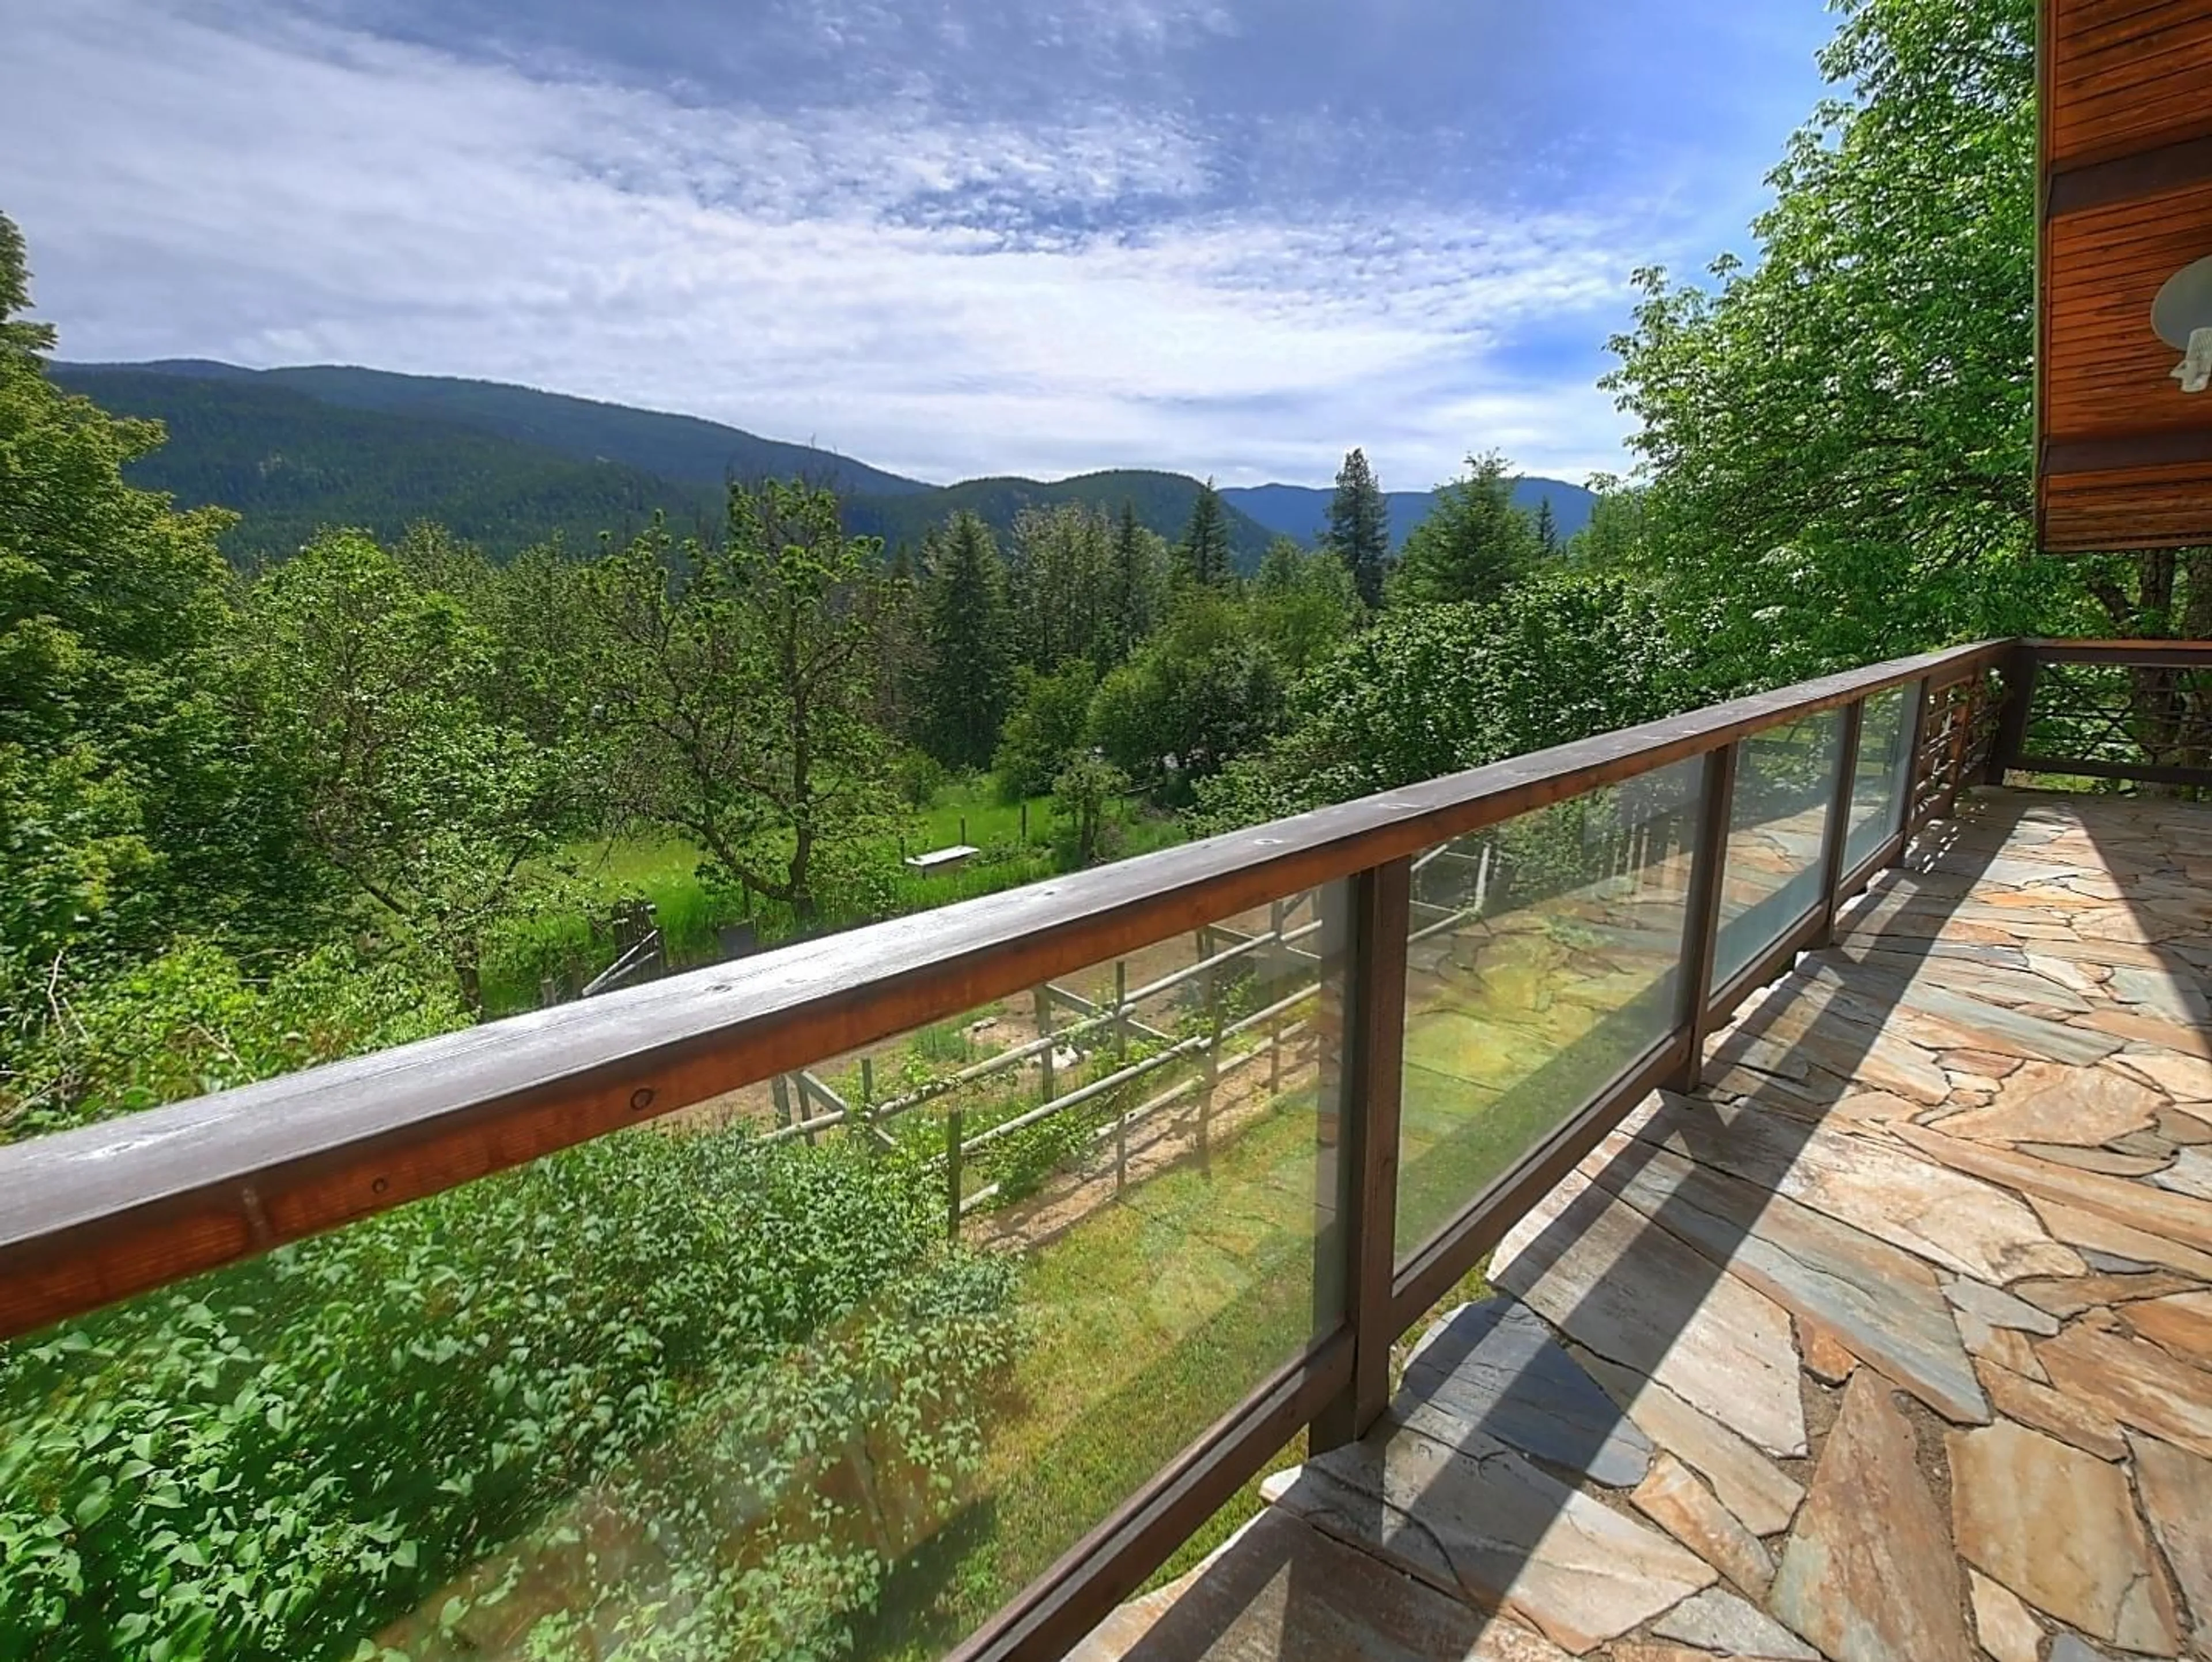 Balcony in the apartment for 6748 PERRY'S BACK ROAD, Winlaw British Columbia V0G2J0